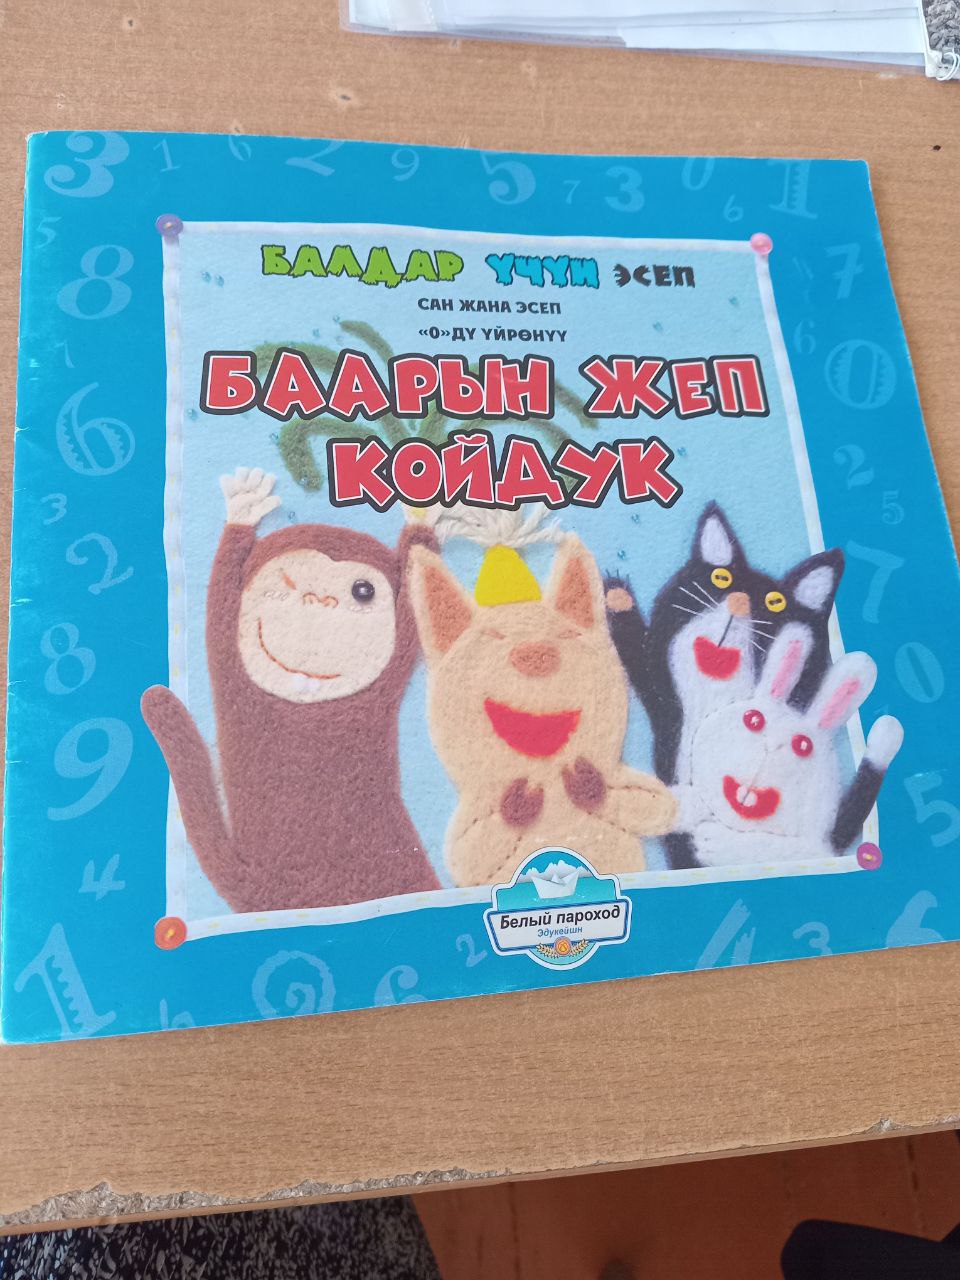 blue picture book with a sewn, felt-style monkey, pig, cat and rabbit drawn on the front. title in Kyrgyz: баарын жеп койдук